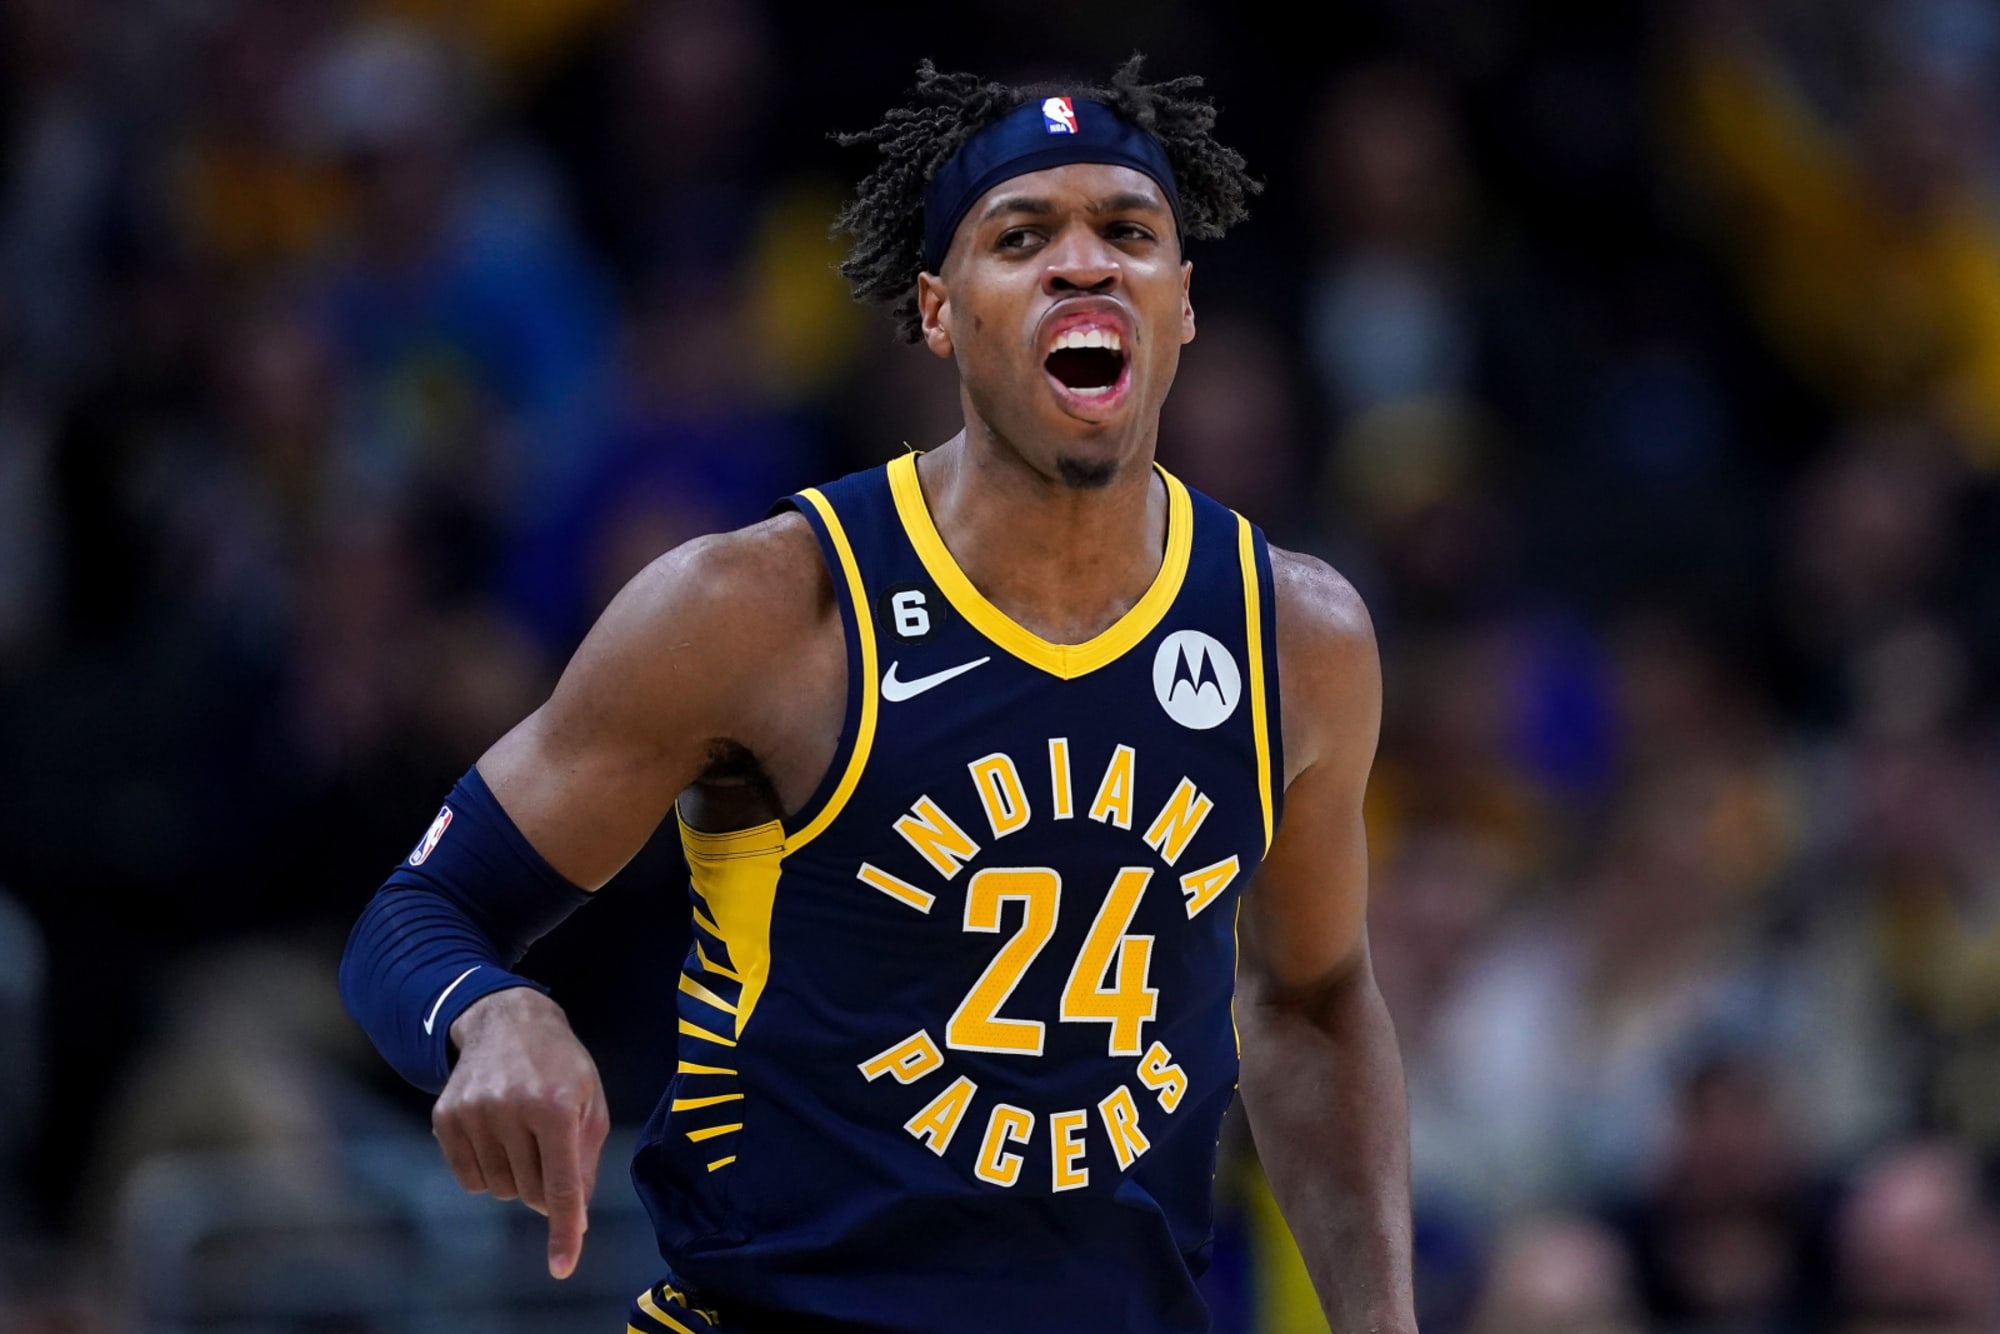 Pacers GM issues reversal statement on Buddy Hield trade rumors